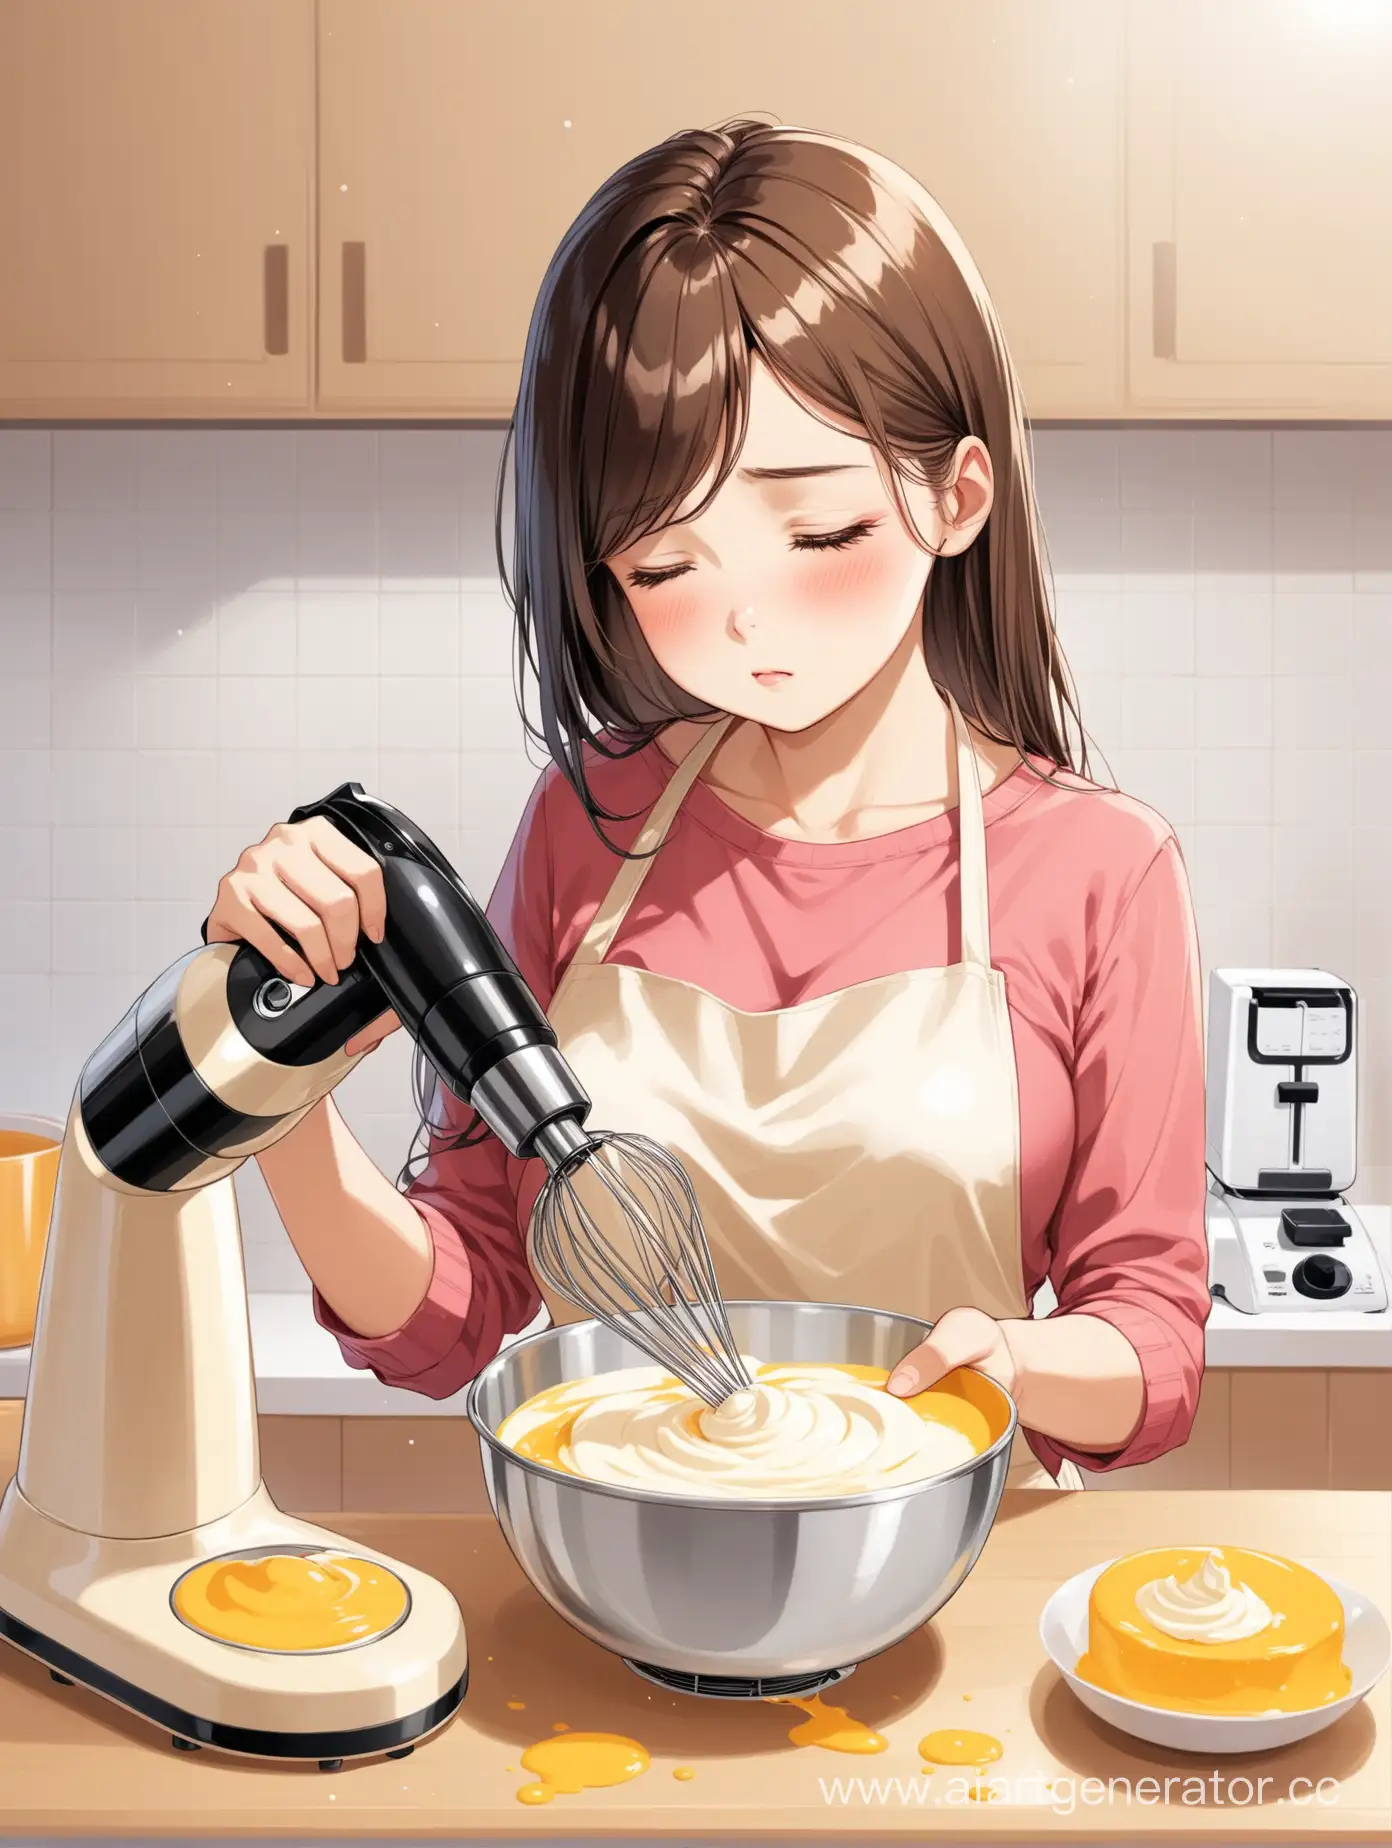 Young-Girl-Fatigued-Mixing-Cream-with-Hand-Mixer